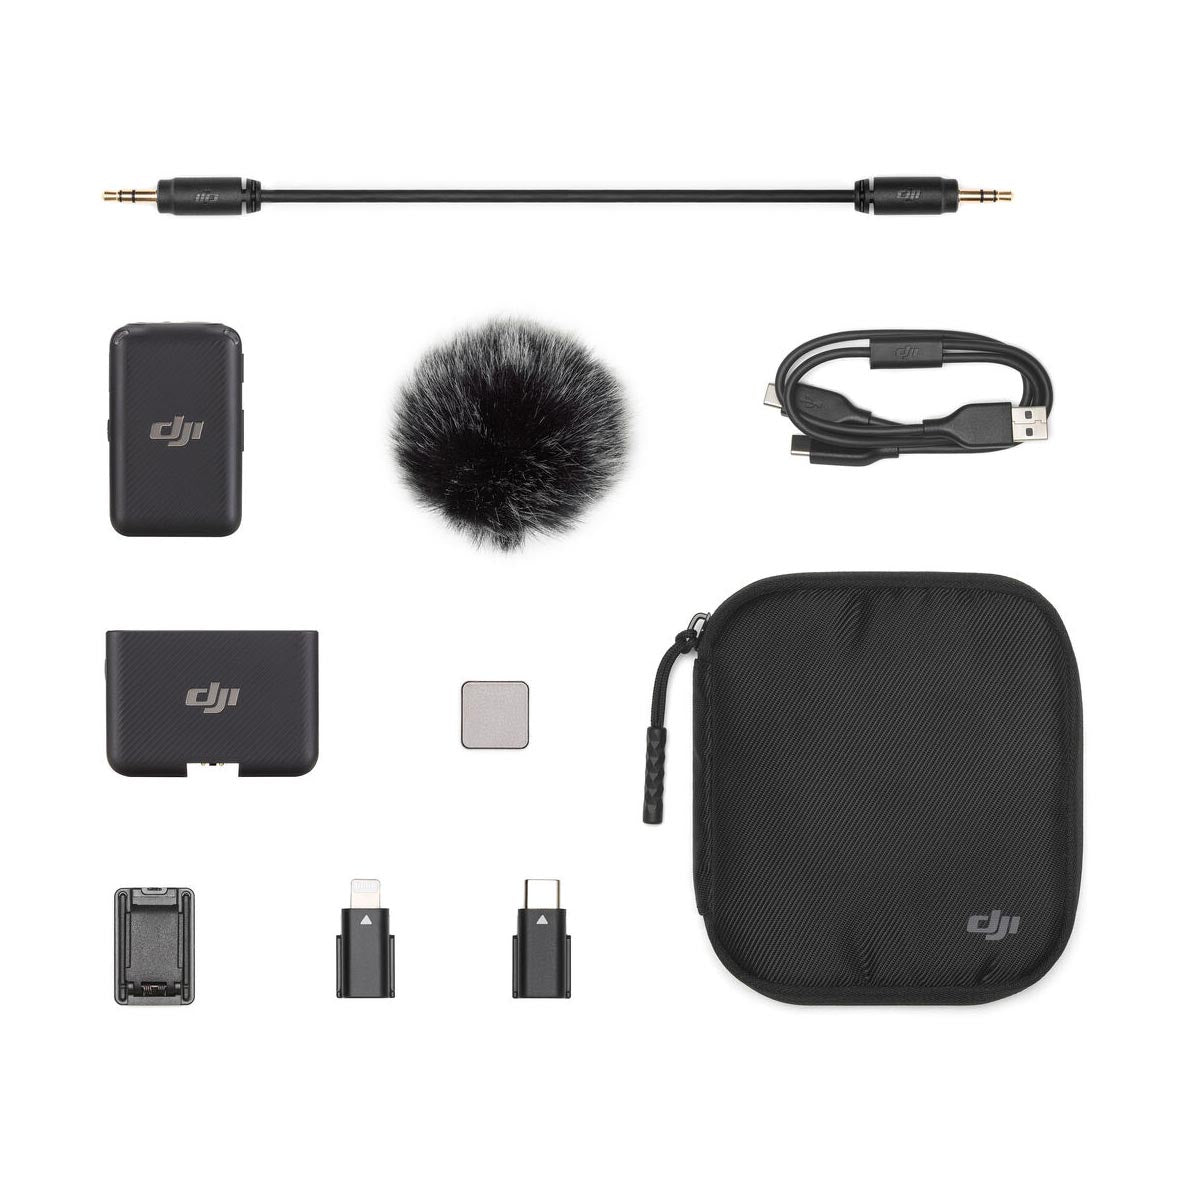 DJI 1-Microphone Compact Wireless Mic System for Camera & Smartphone (2.4 GHz)